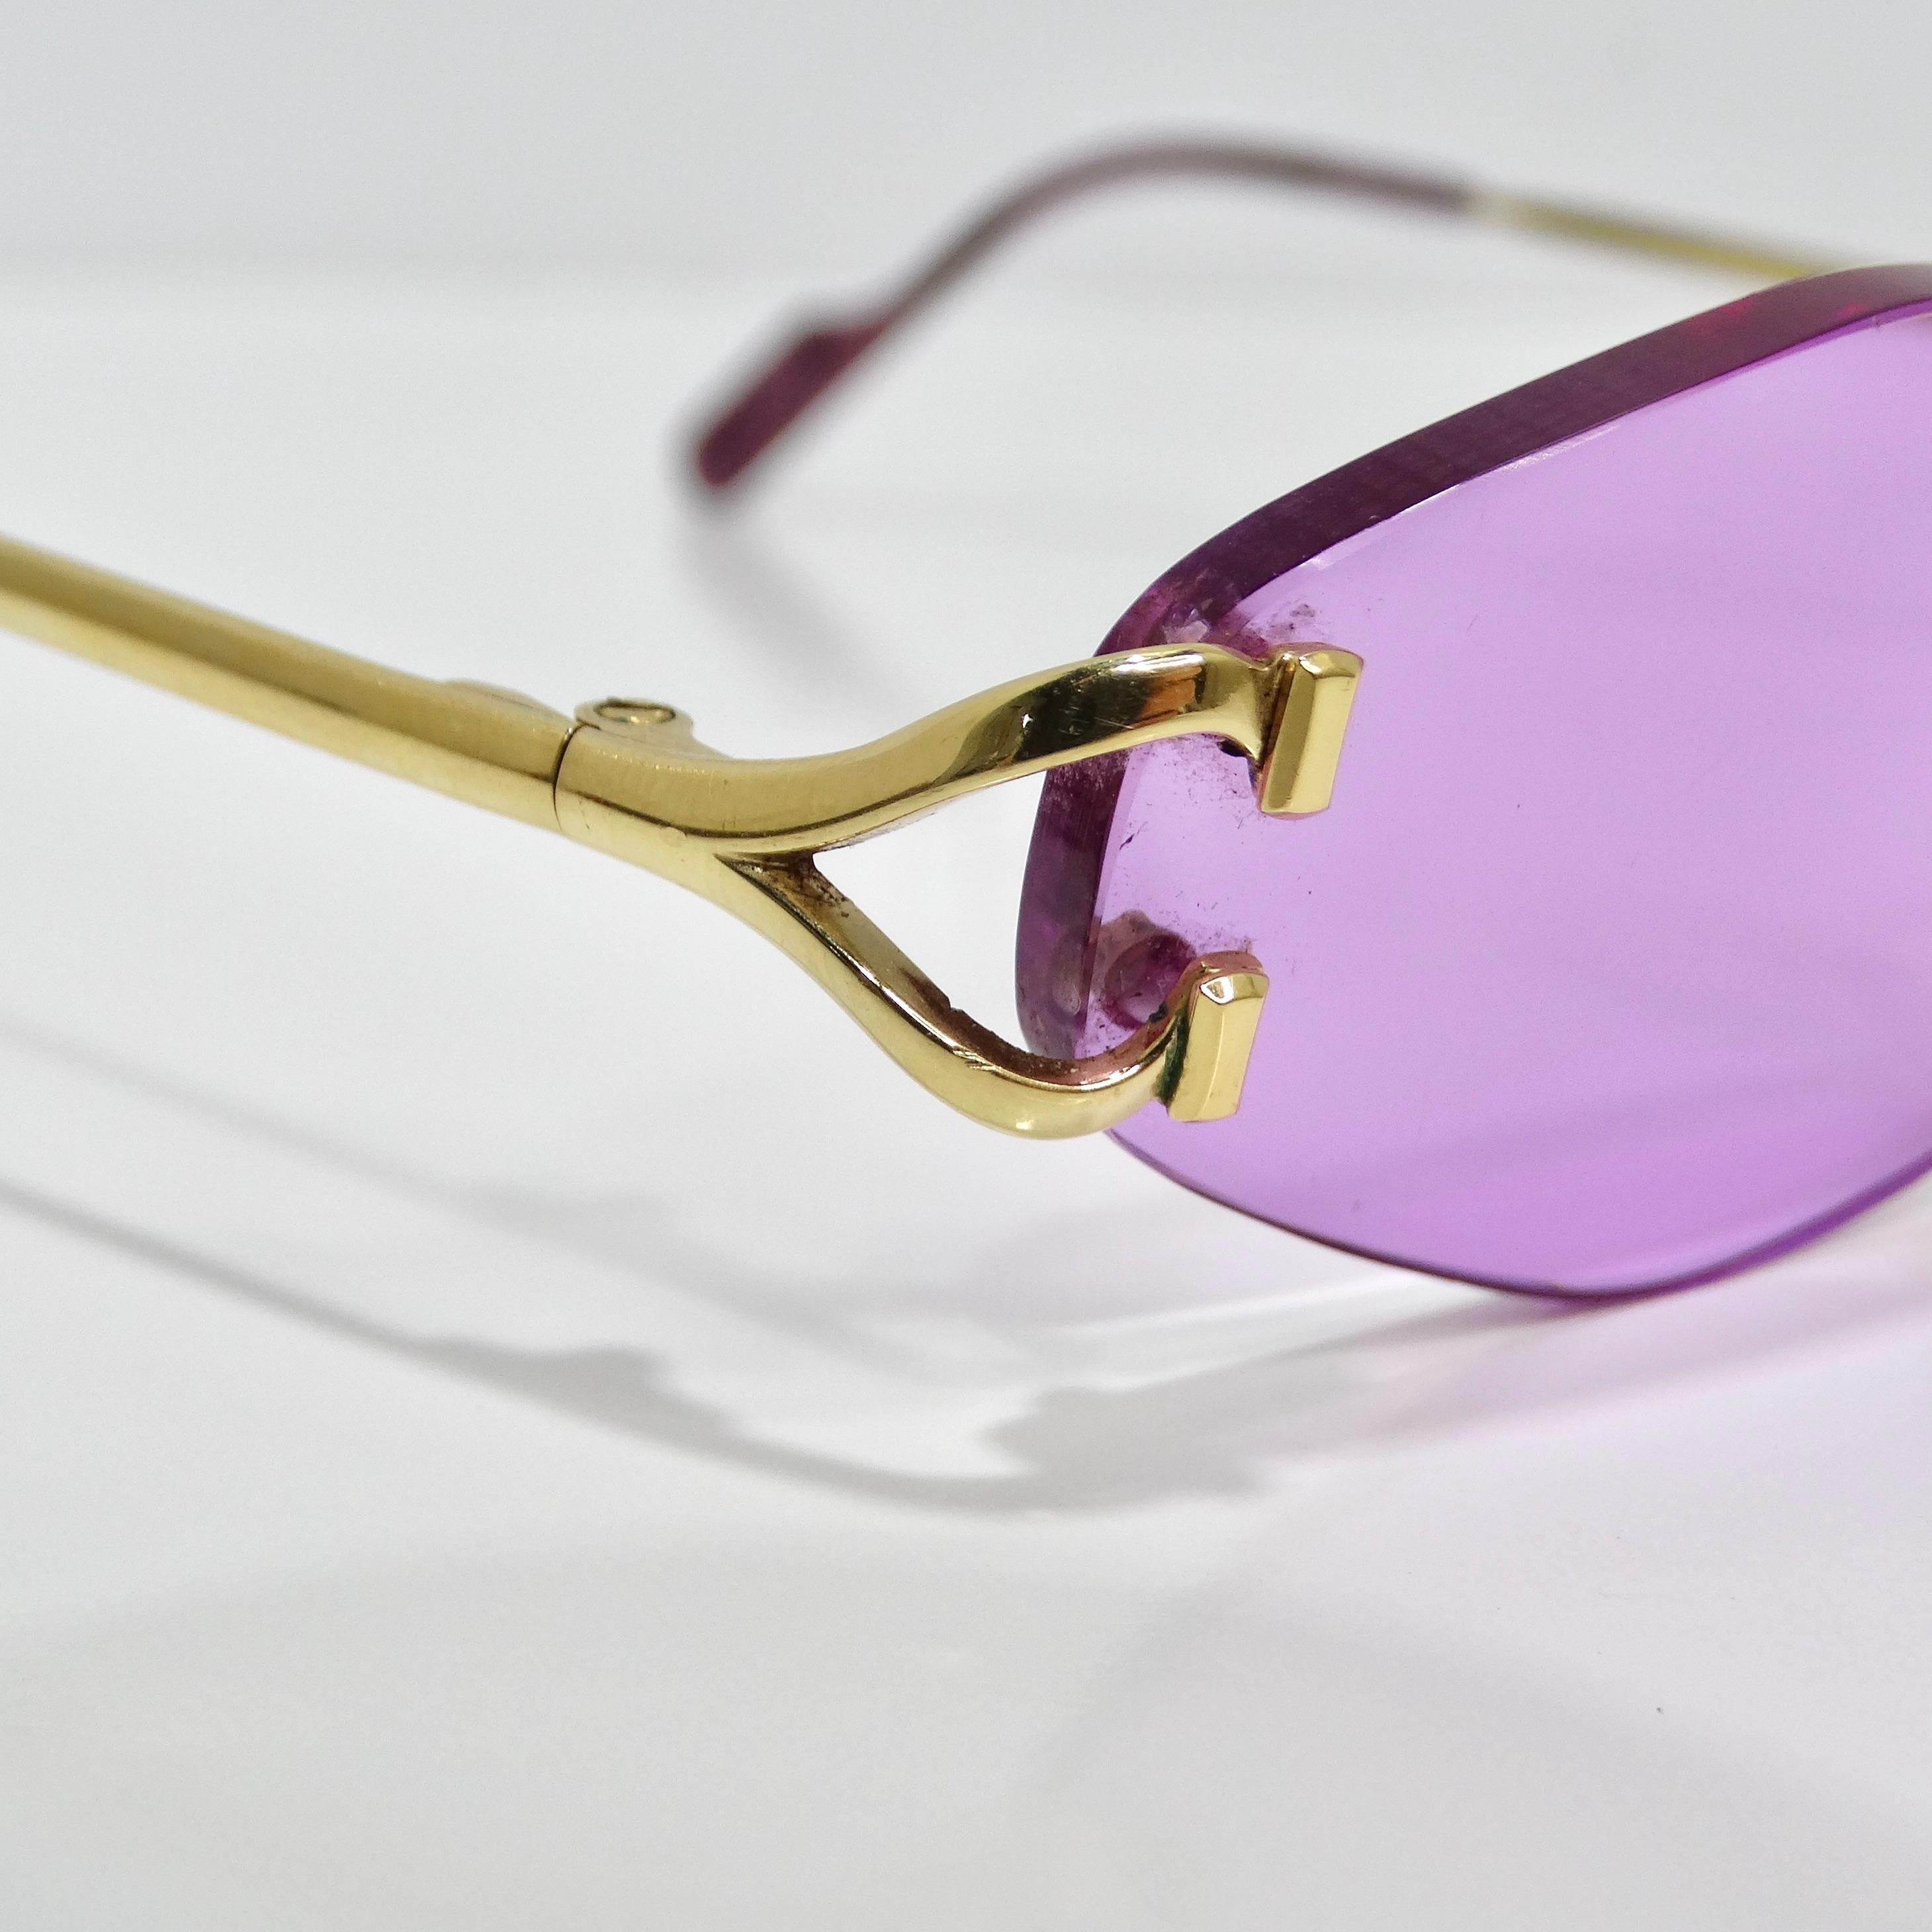 Elevate your style with the Cartier Vintage Rimless Purple Sunglasses, a chic nod to early 2000s fashion. These statement sunglasses boast hexagon rimless lenses in a vibrant purple hue, exuding a bold and sophisticated look. The skinny gold tone